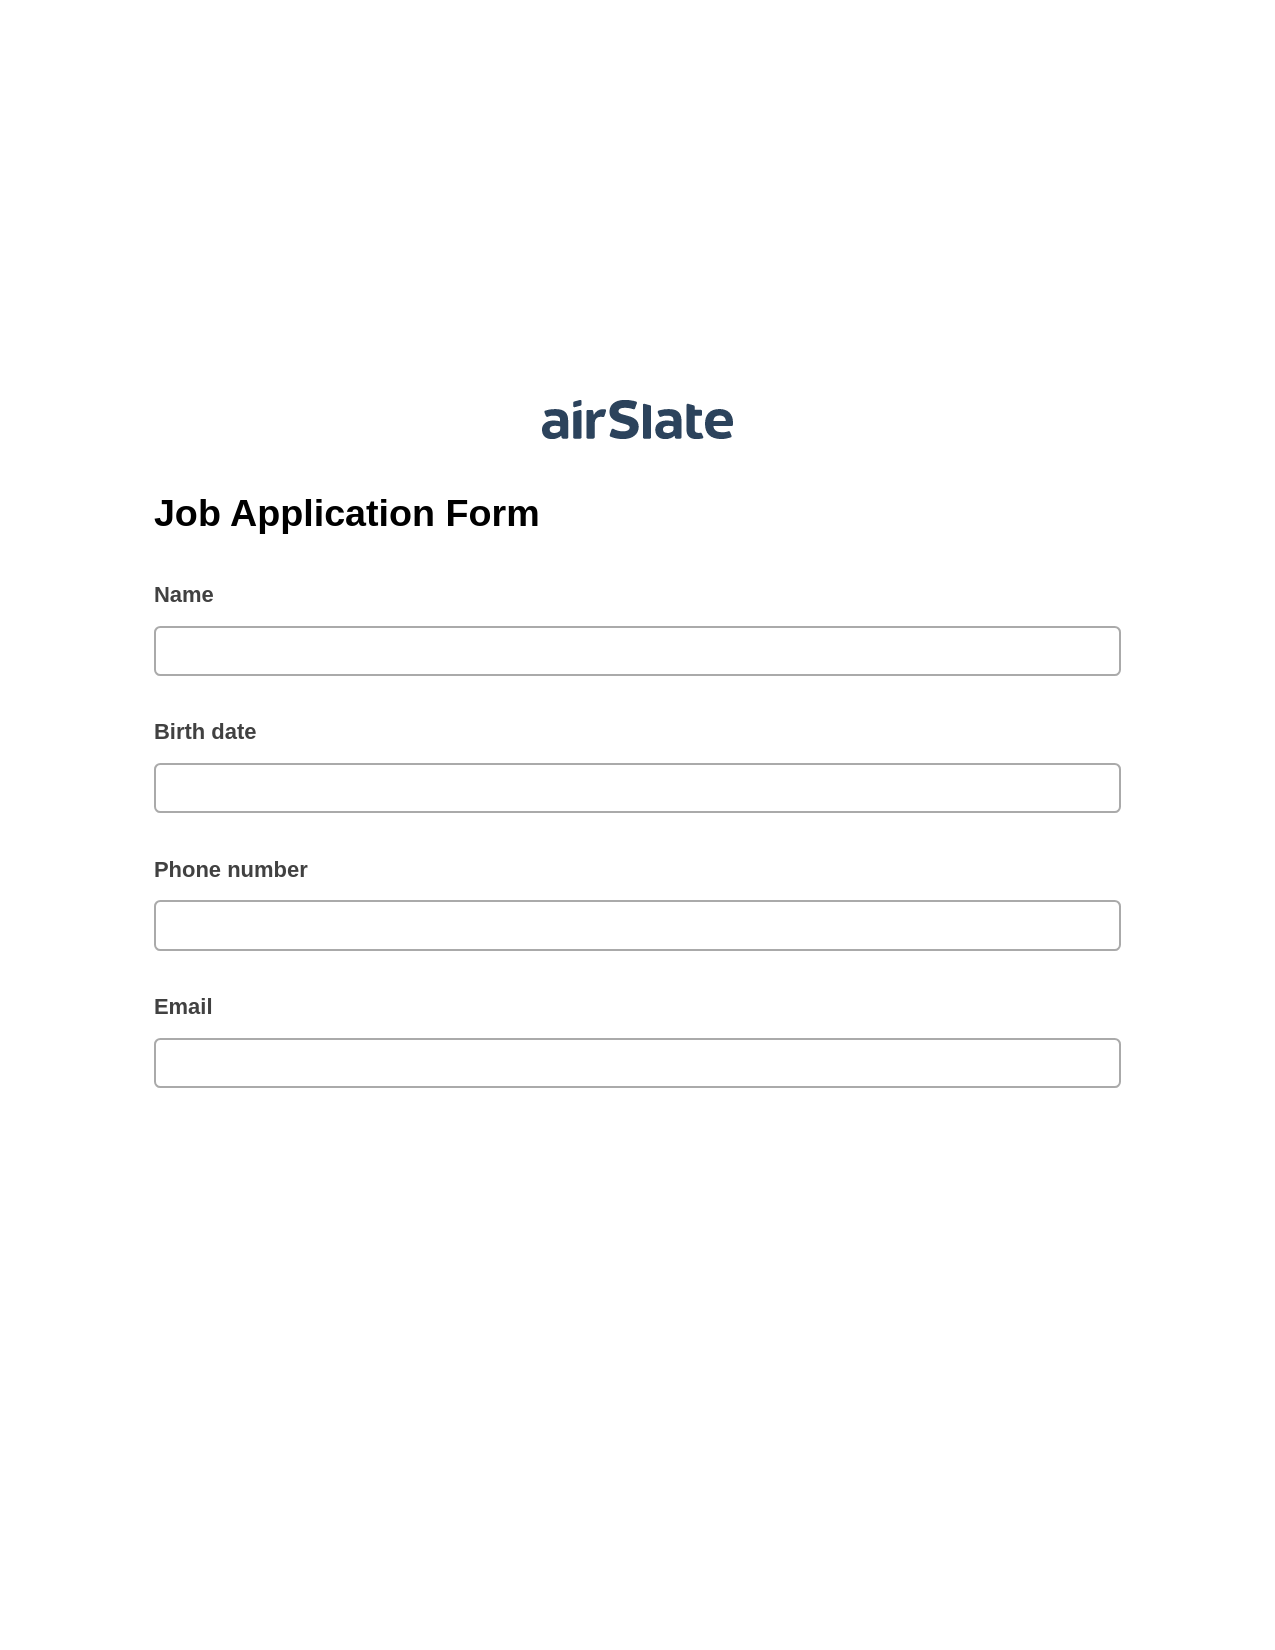 Multirole Job Application Form Pre-fill from MySQL Dropdown Options Bot, Create MS Dynamics 365 Records Bot, Export to Excel 365 Bot